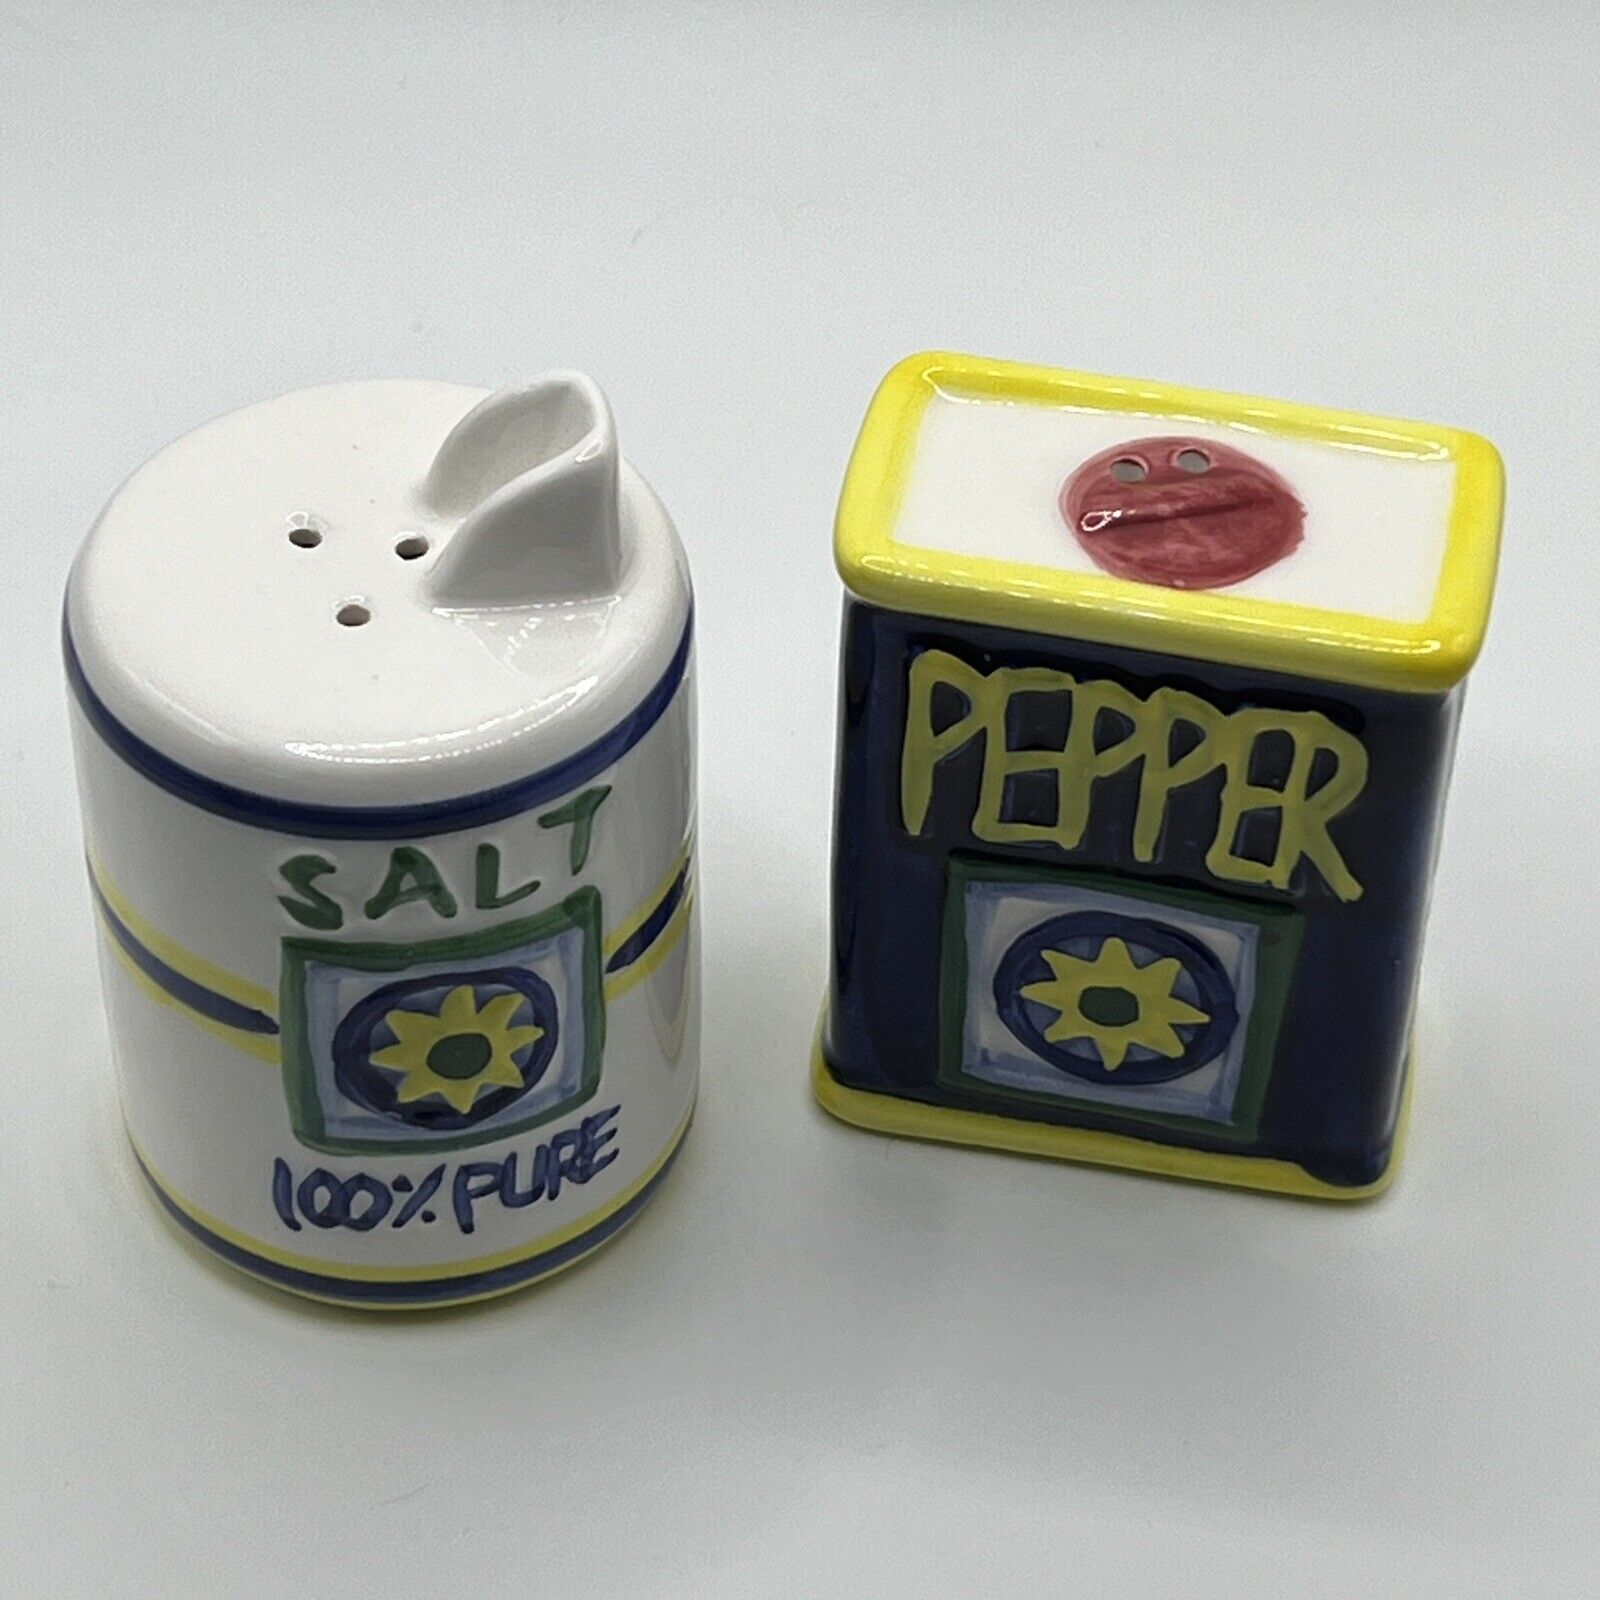 🧂Vintage Giftco Ceramic Salt And Pepper Shakers Salt Can & Pepper Box Shaped